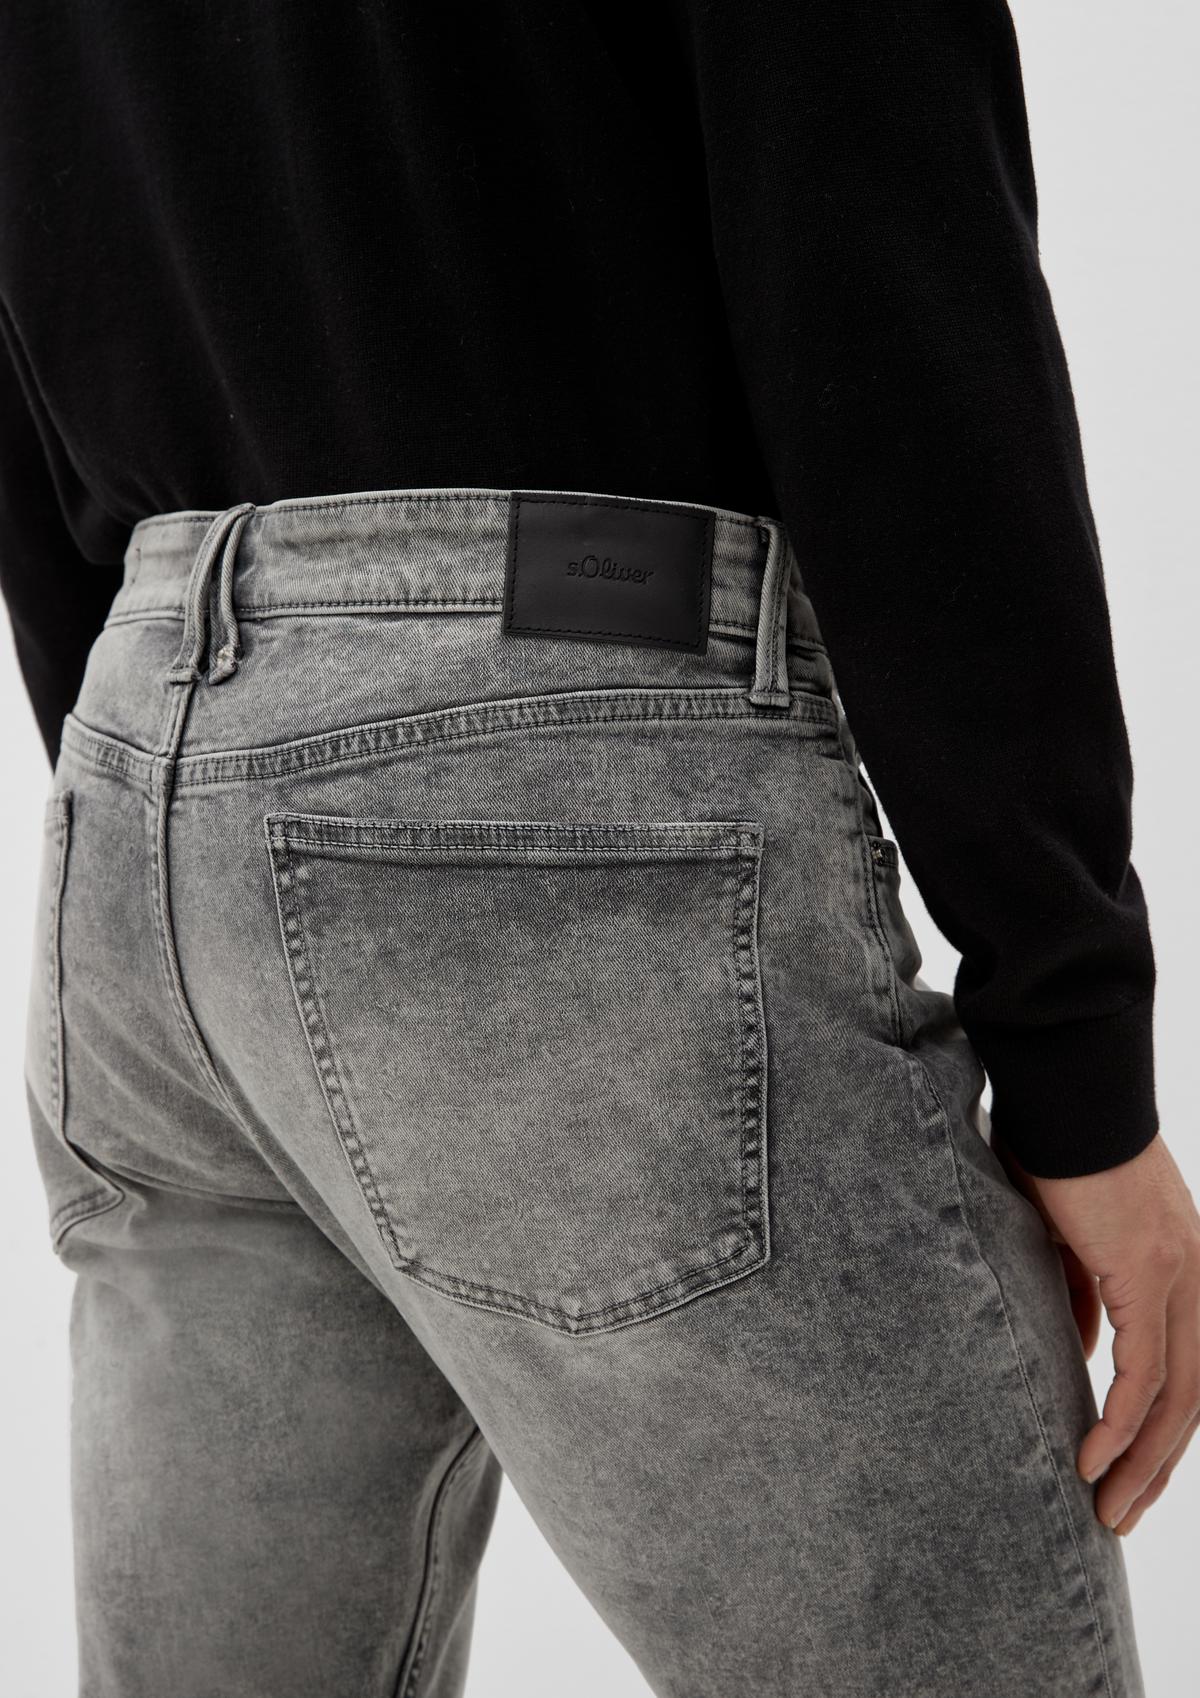 Slim fit: jeans in a 5-pocket style - stone